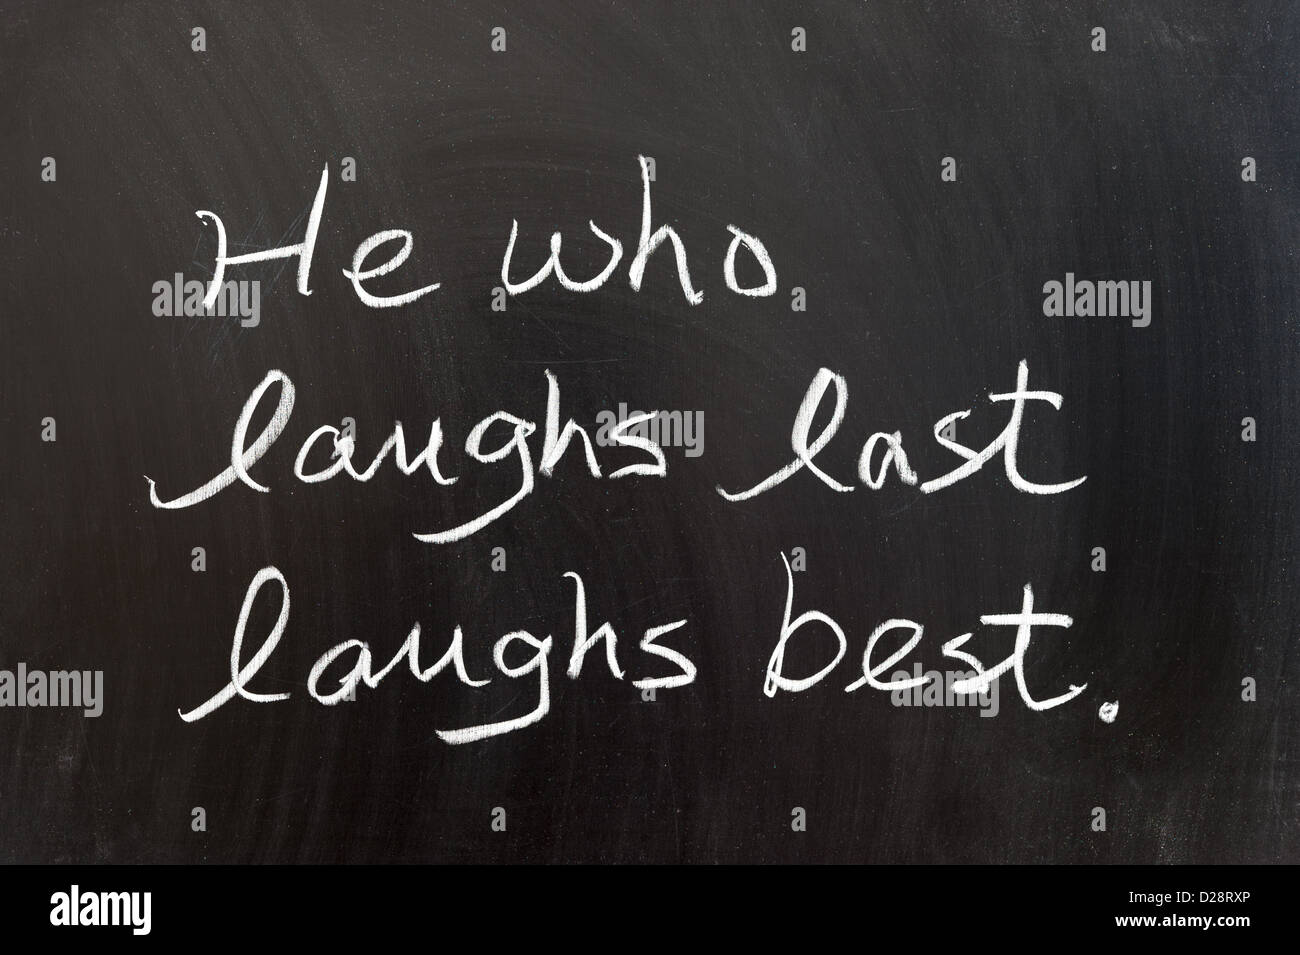 He who laughs last laughs best saying written on chalkboard Stock Photo